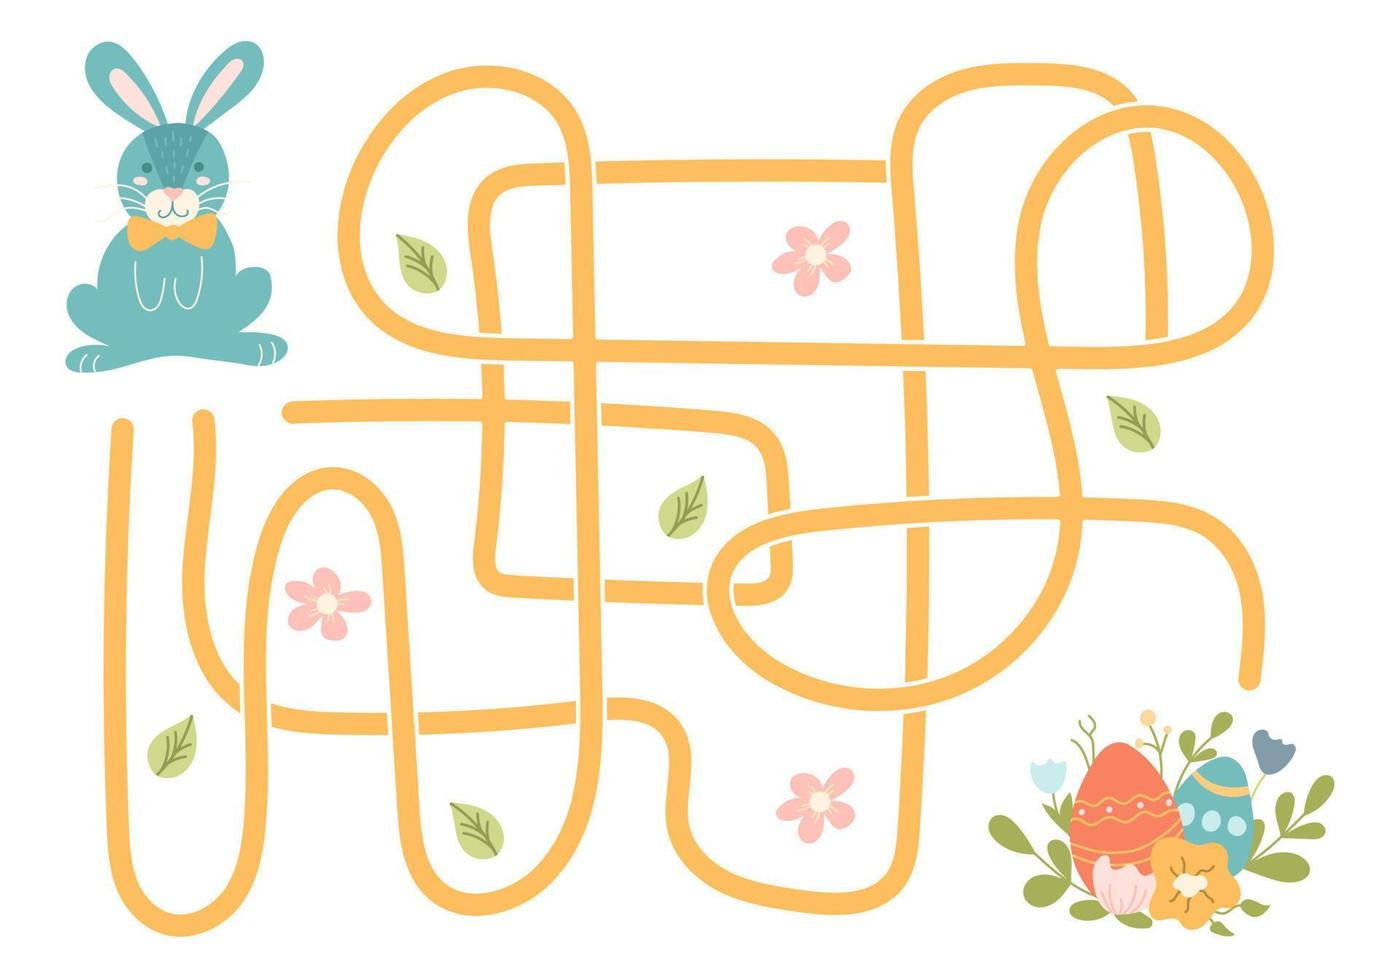 Labyrinth, help the rabbit find the right way to the Easter eggs. Logical quest for children. Cute illustration for childrens books, educational game vector